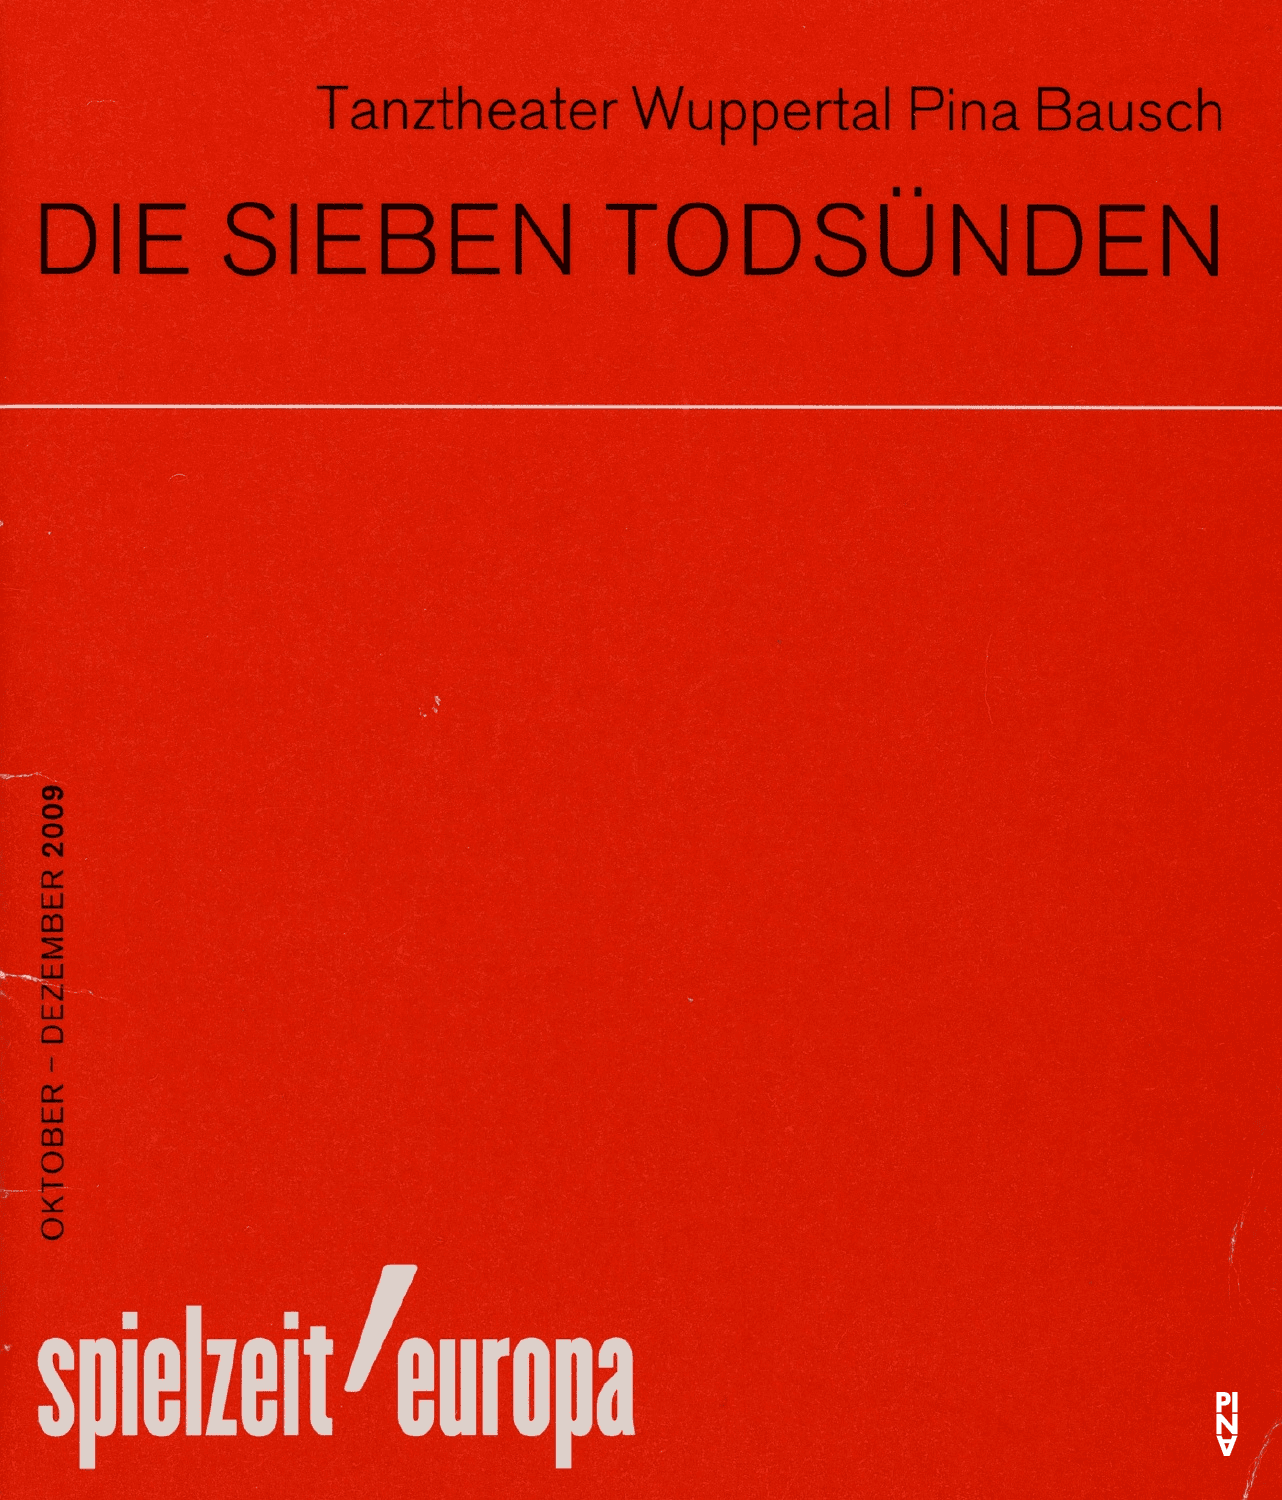 Booklet for “The Seven Deadly Sins” by Pina Bausch with Tanztheater Wuppertal in in Berlin, 12/10/2009 – 12/13/2009